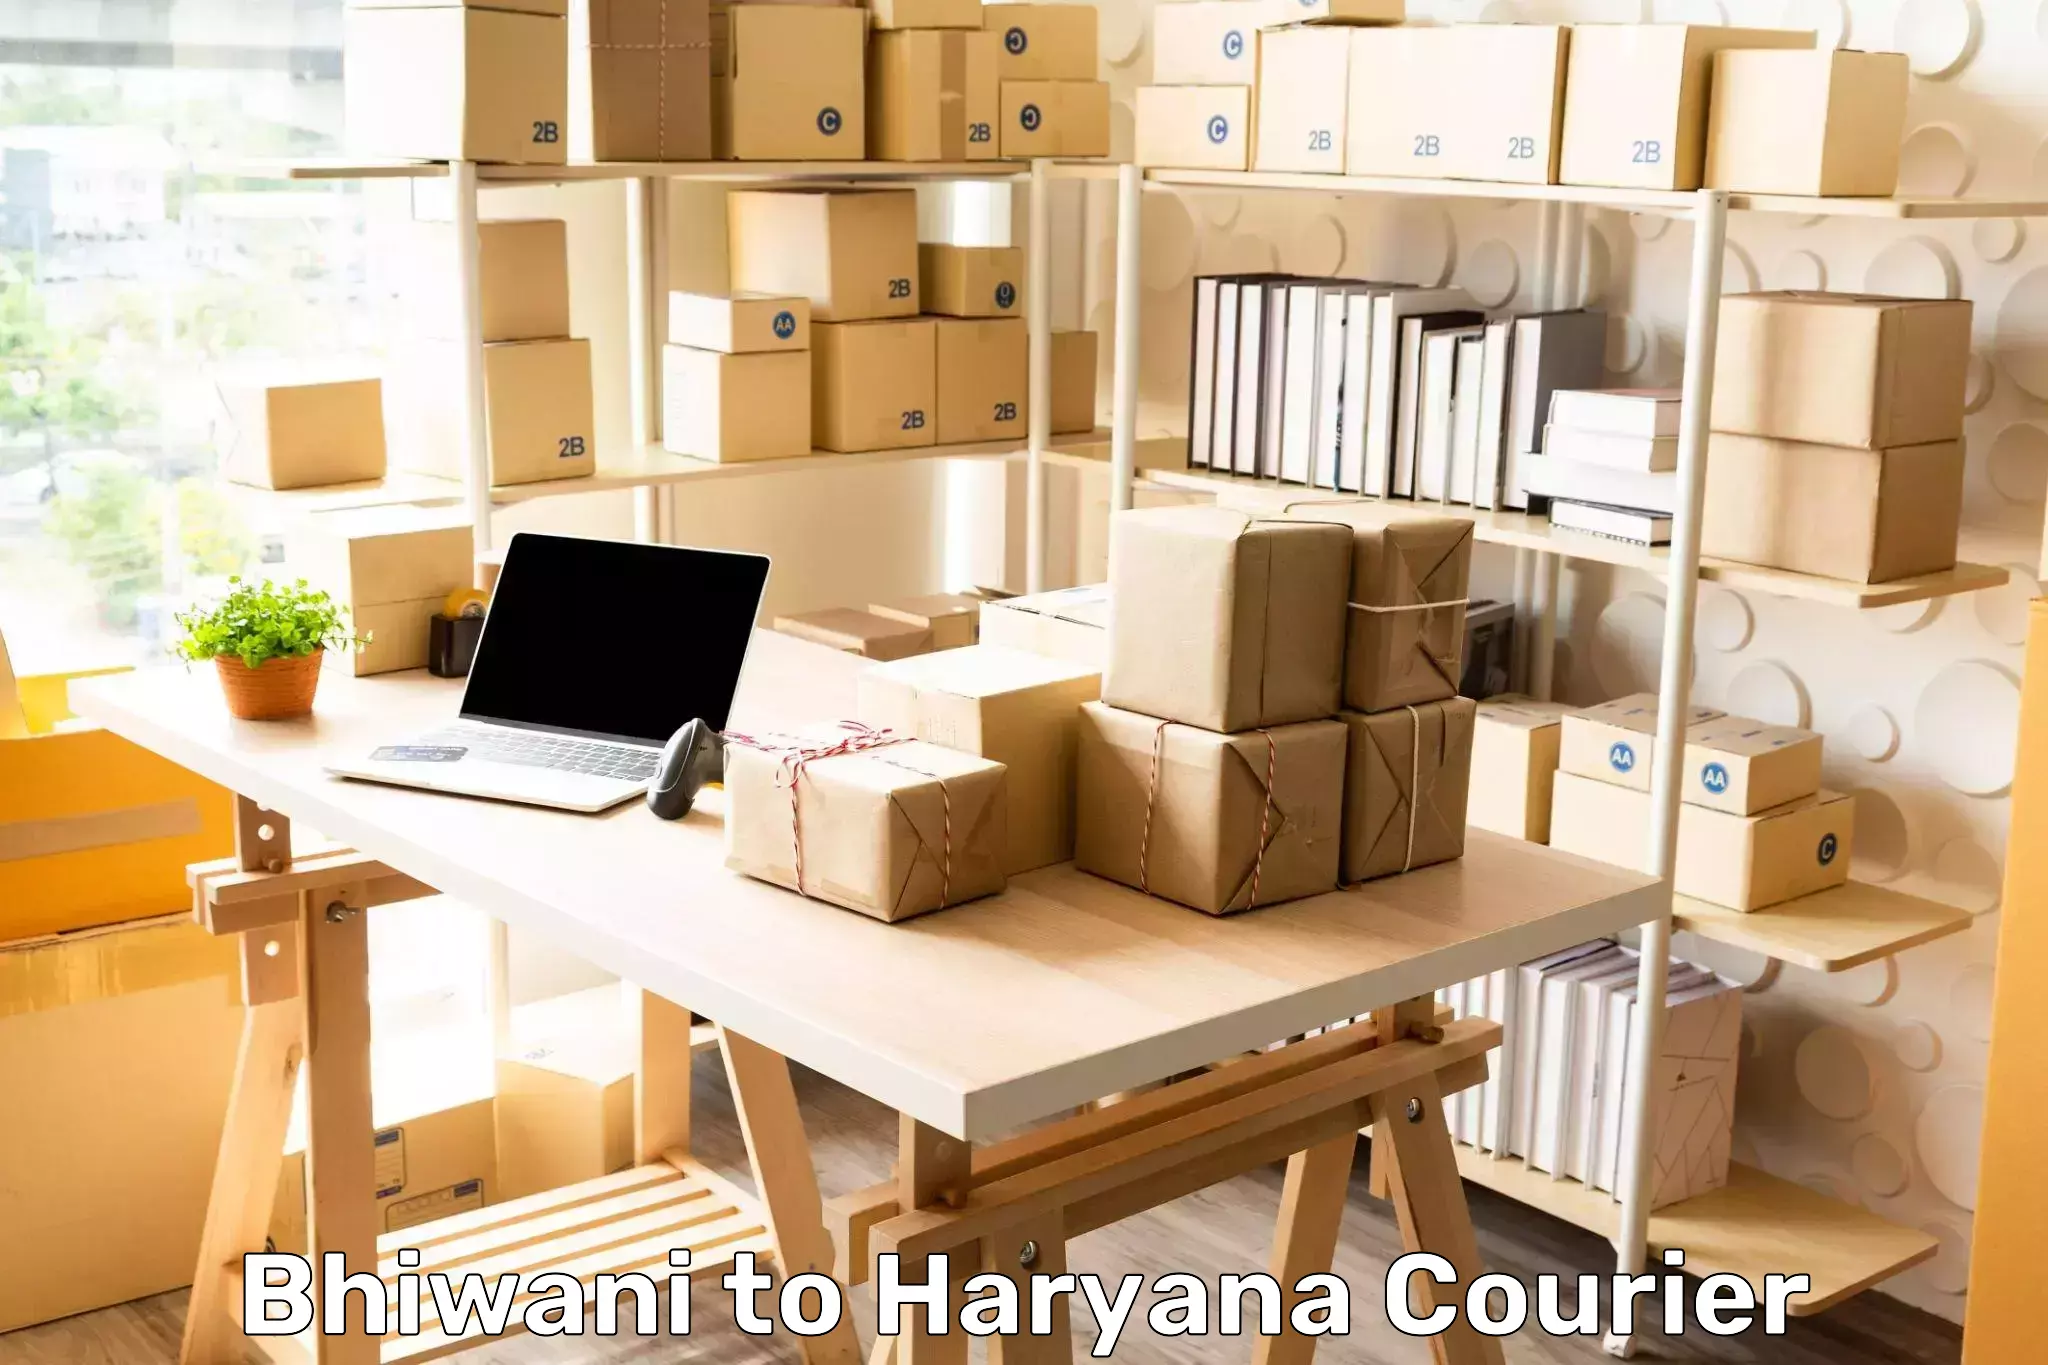 Flexible delivery schedules Bhiwani to Sonipat